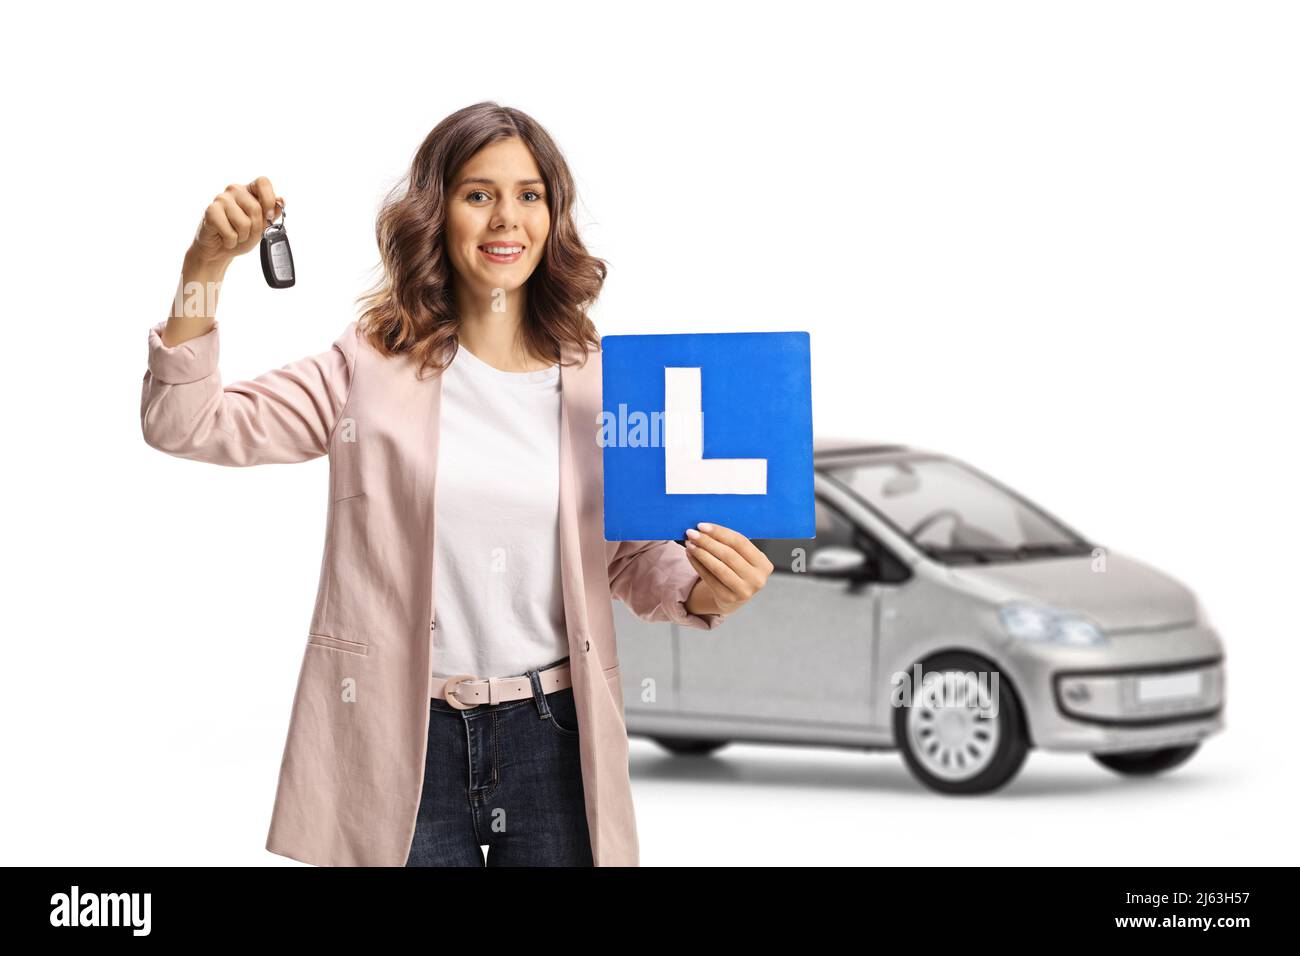 Young woman holding car keys and a learner plate in front of a silver car isolated on white background Stock Photo